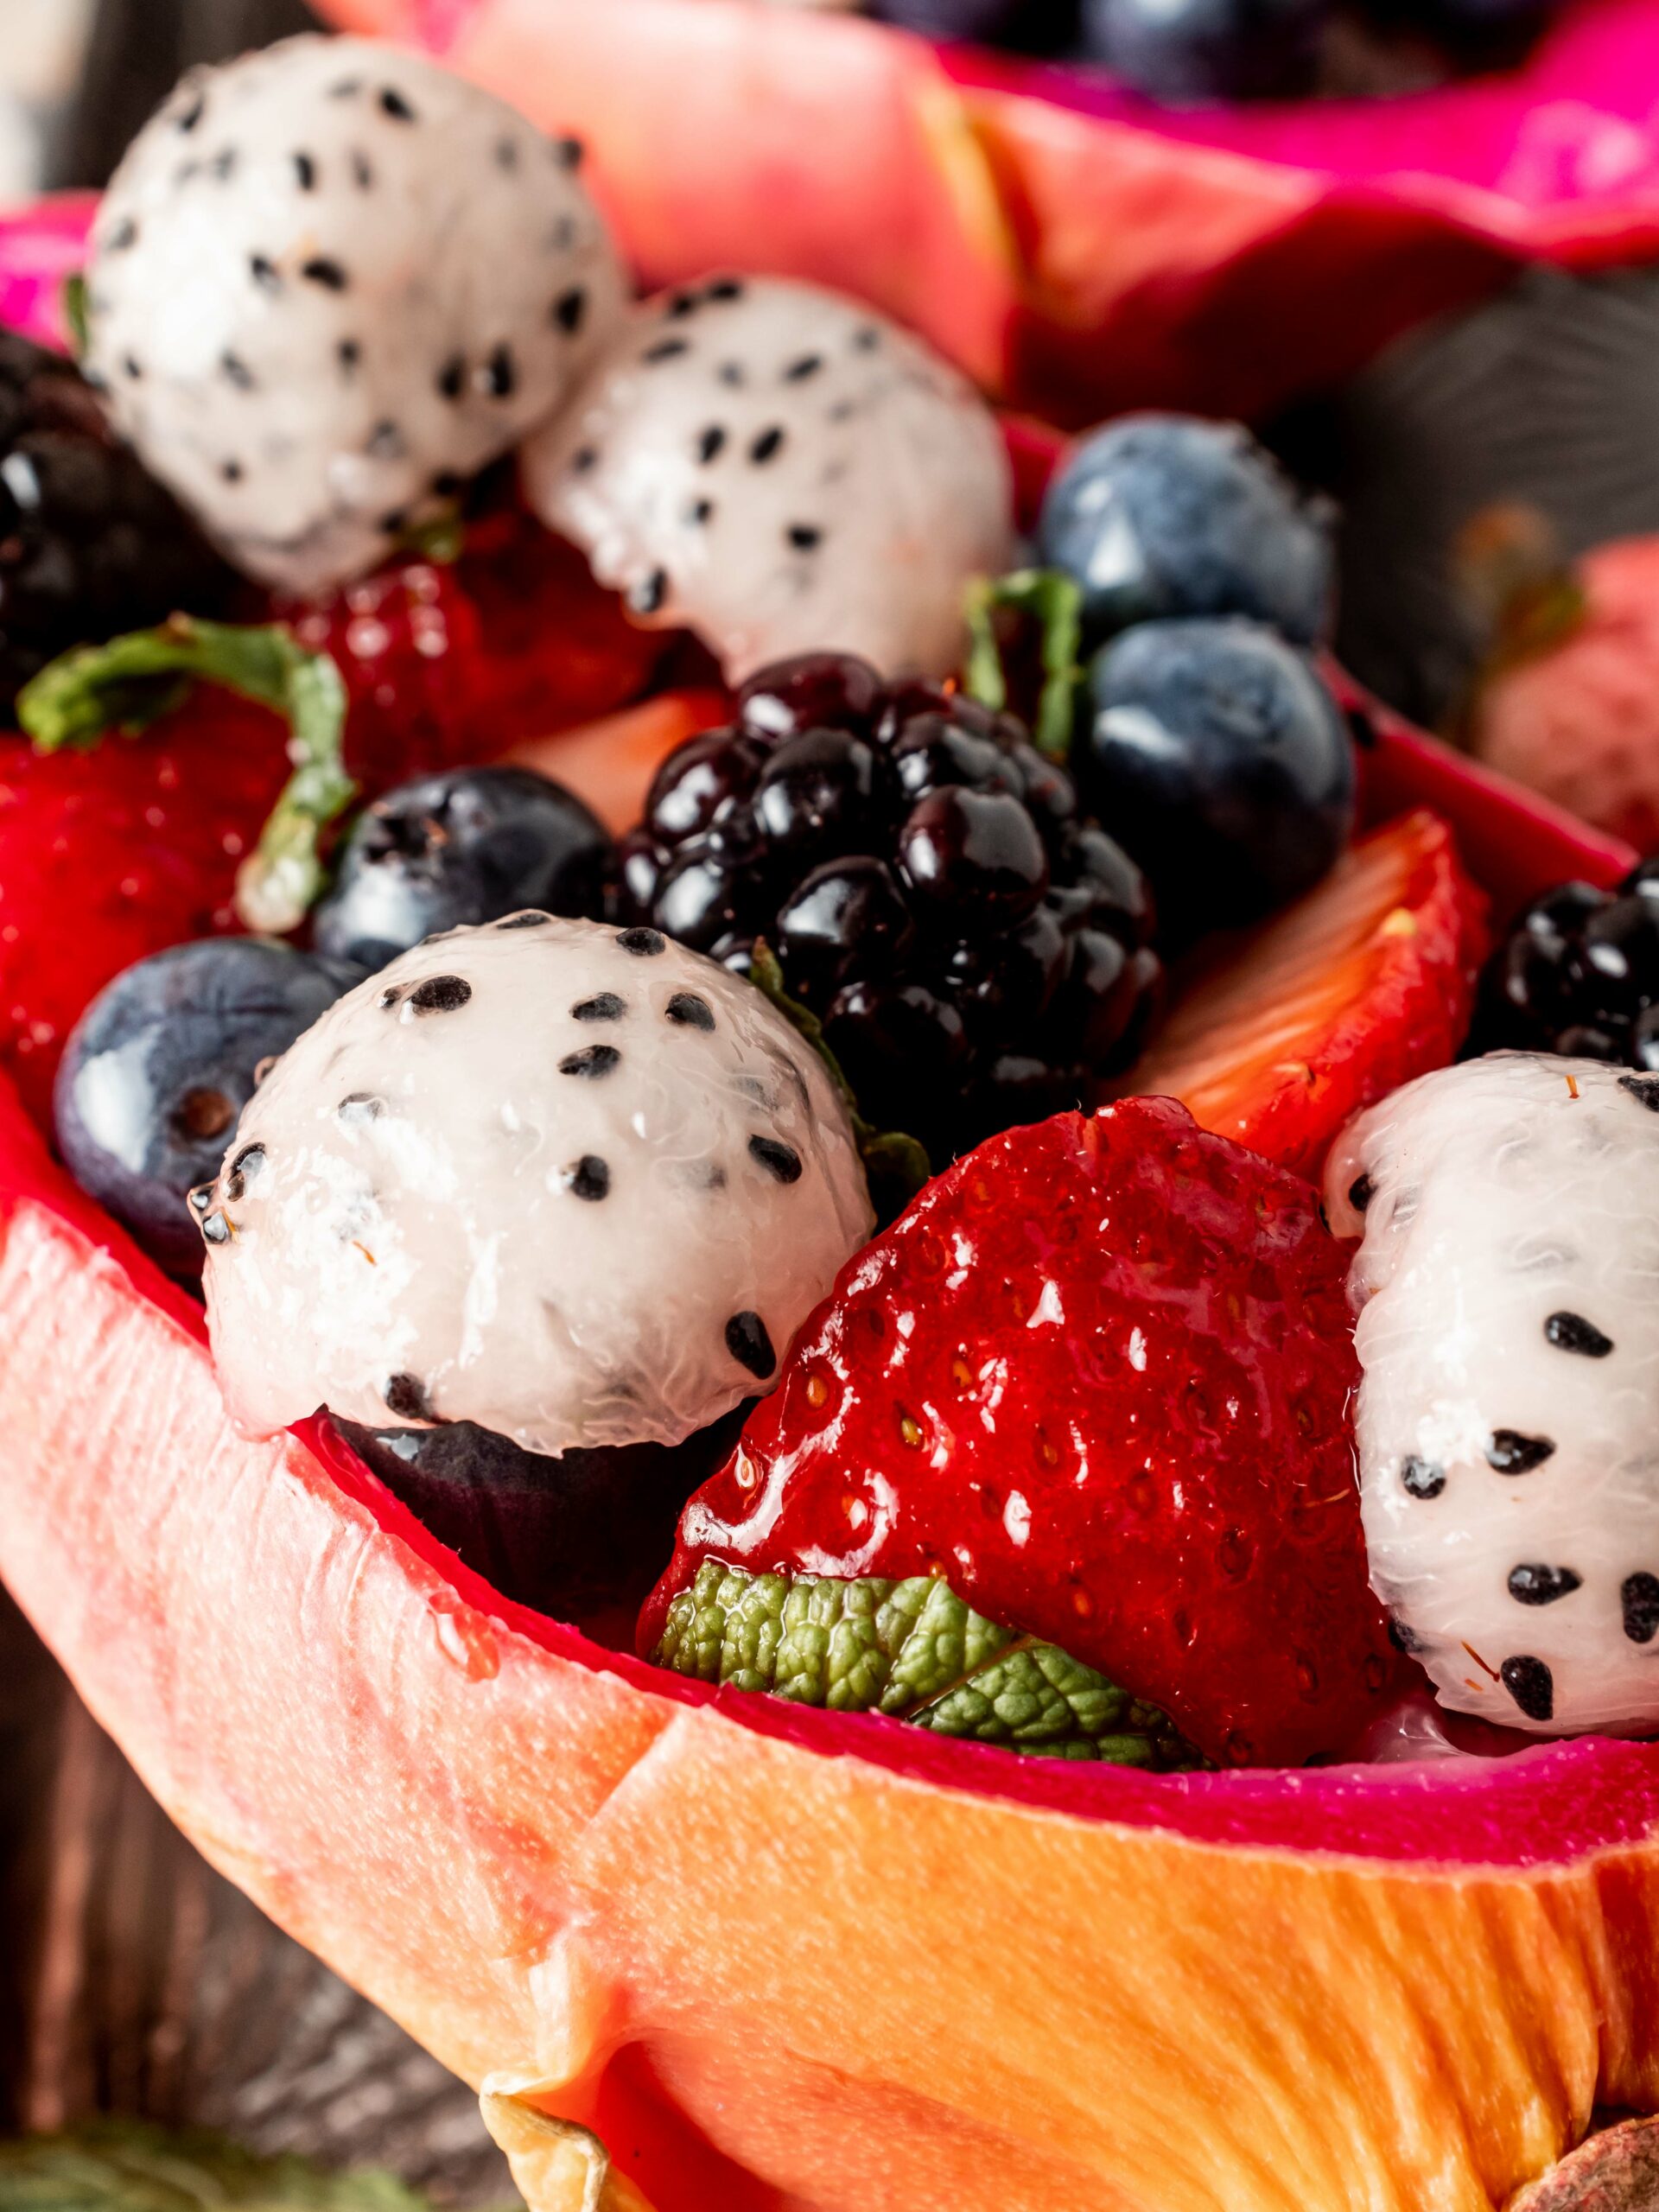 Using dragon fruit as a bowl for fruit salad